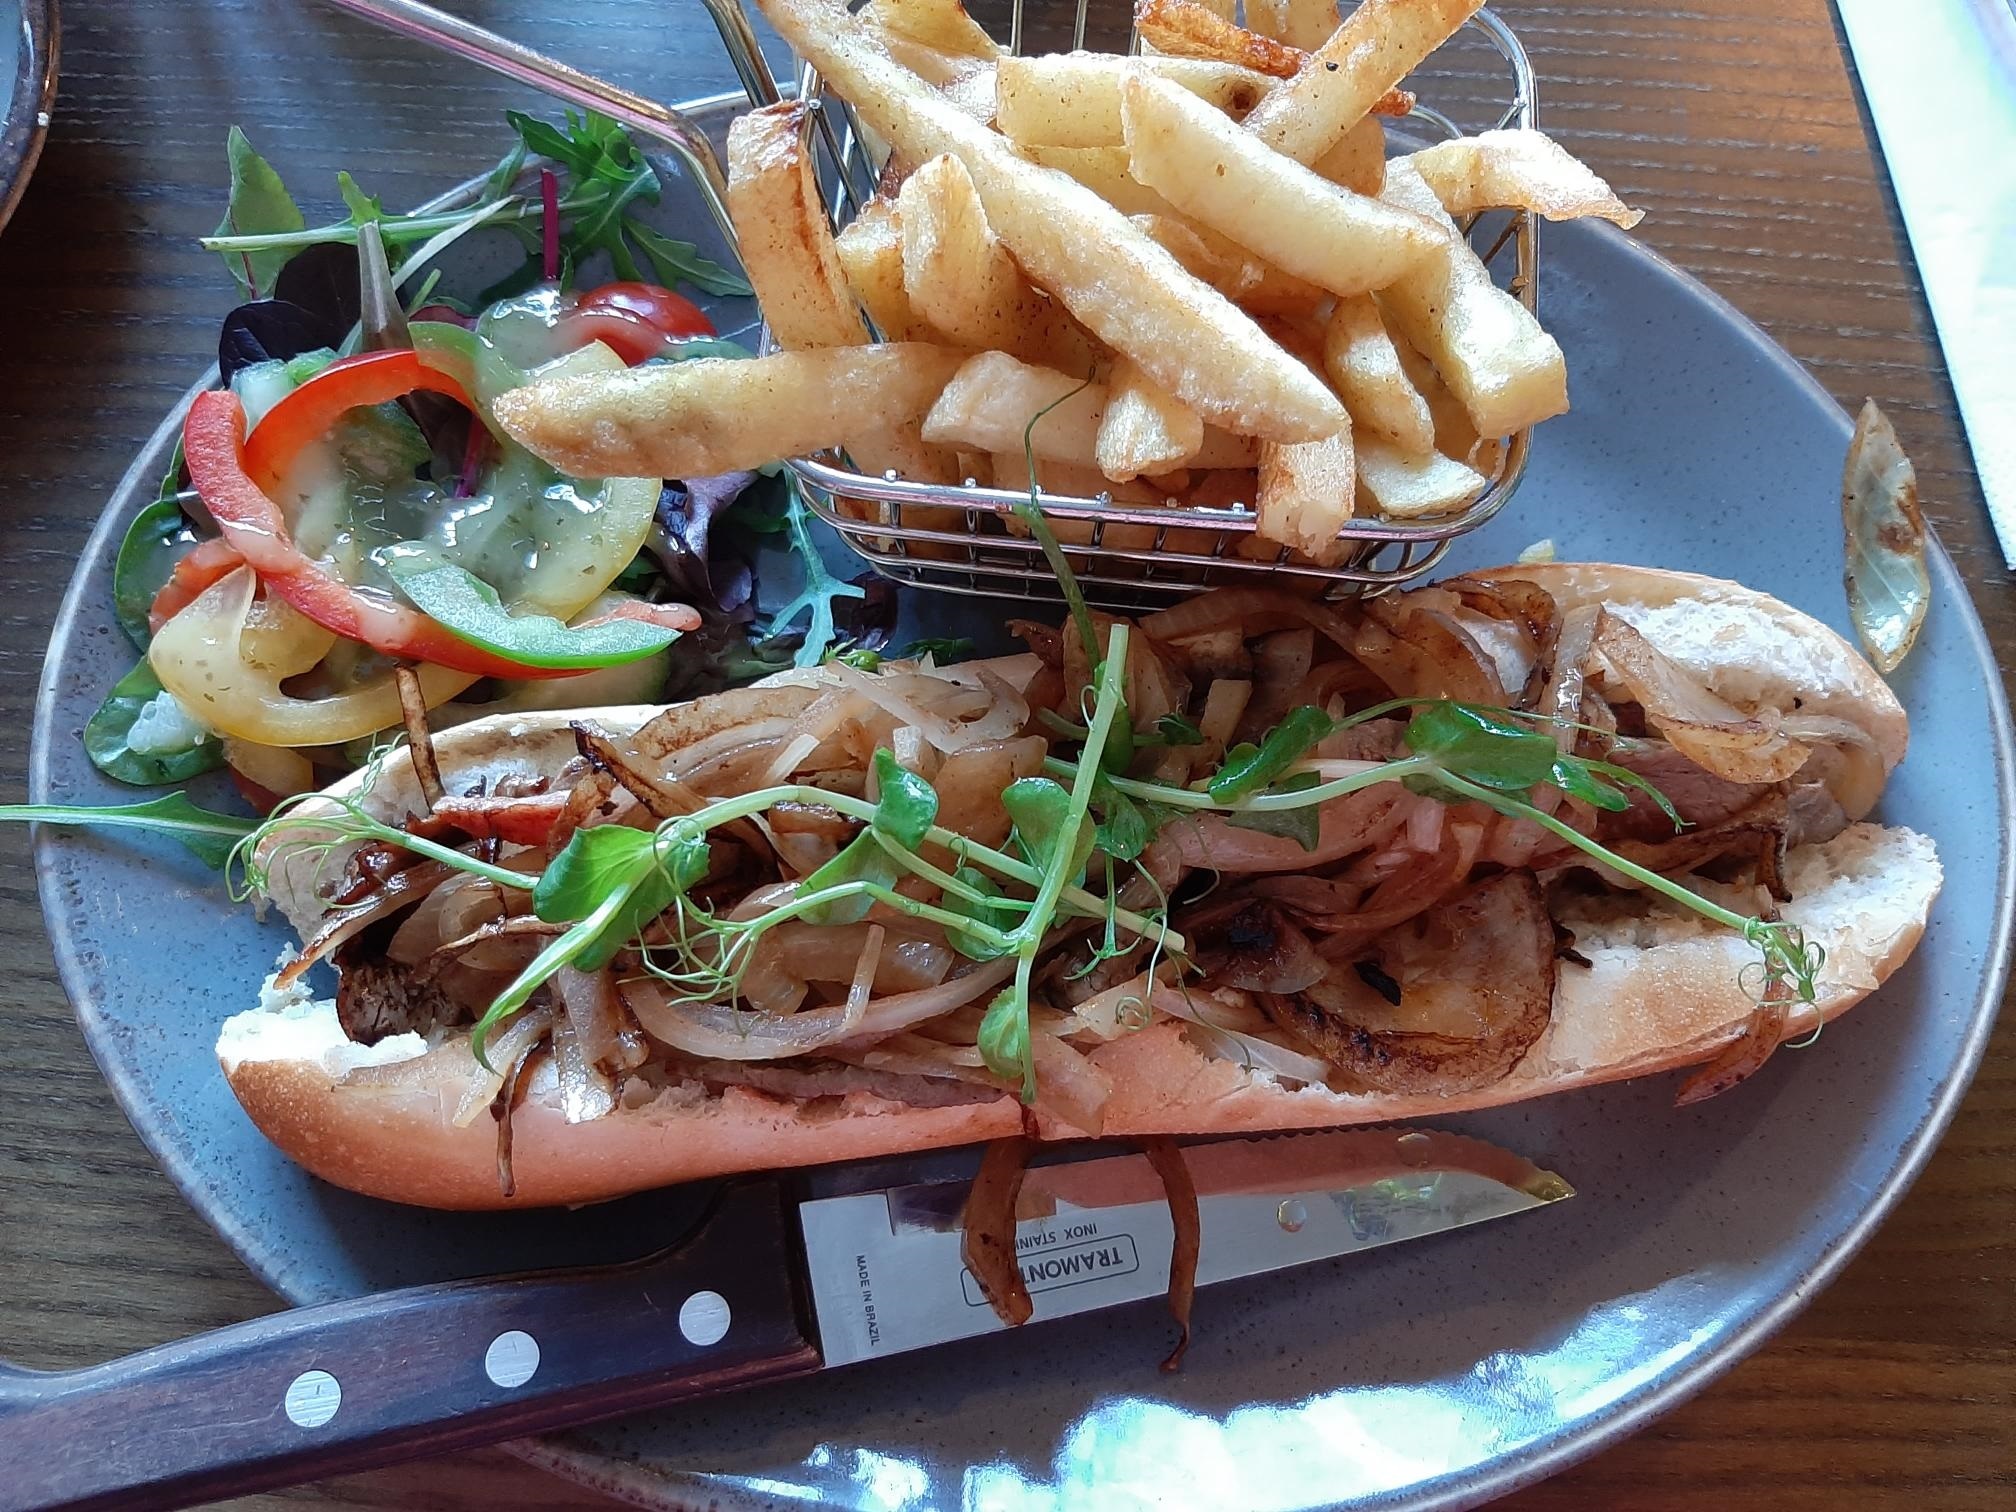 Steak sandwich with chips at the Dudley Arms, Ingleby Greenhow